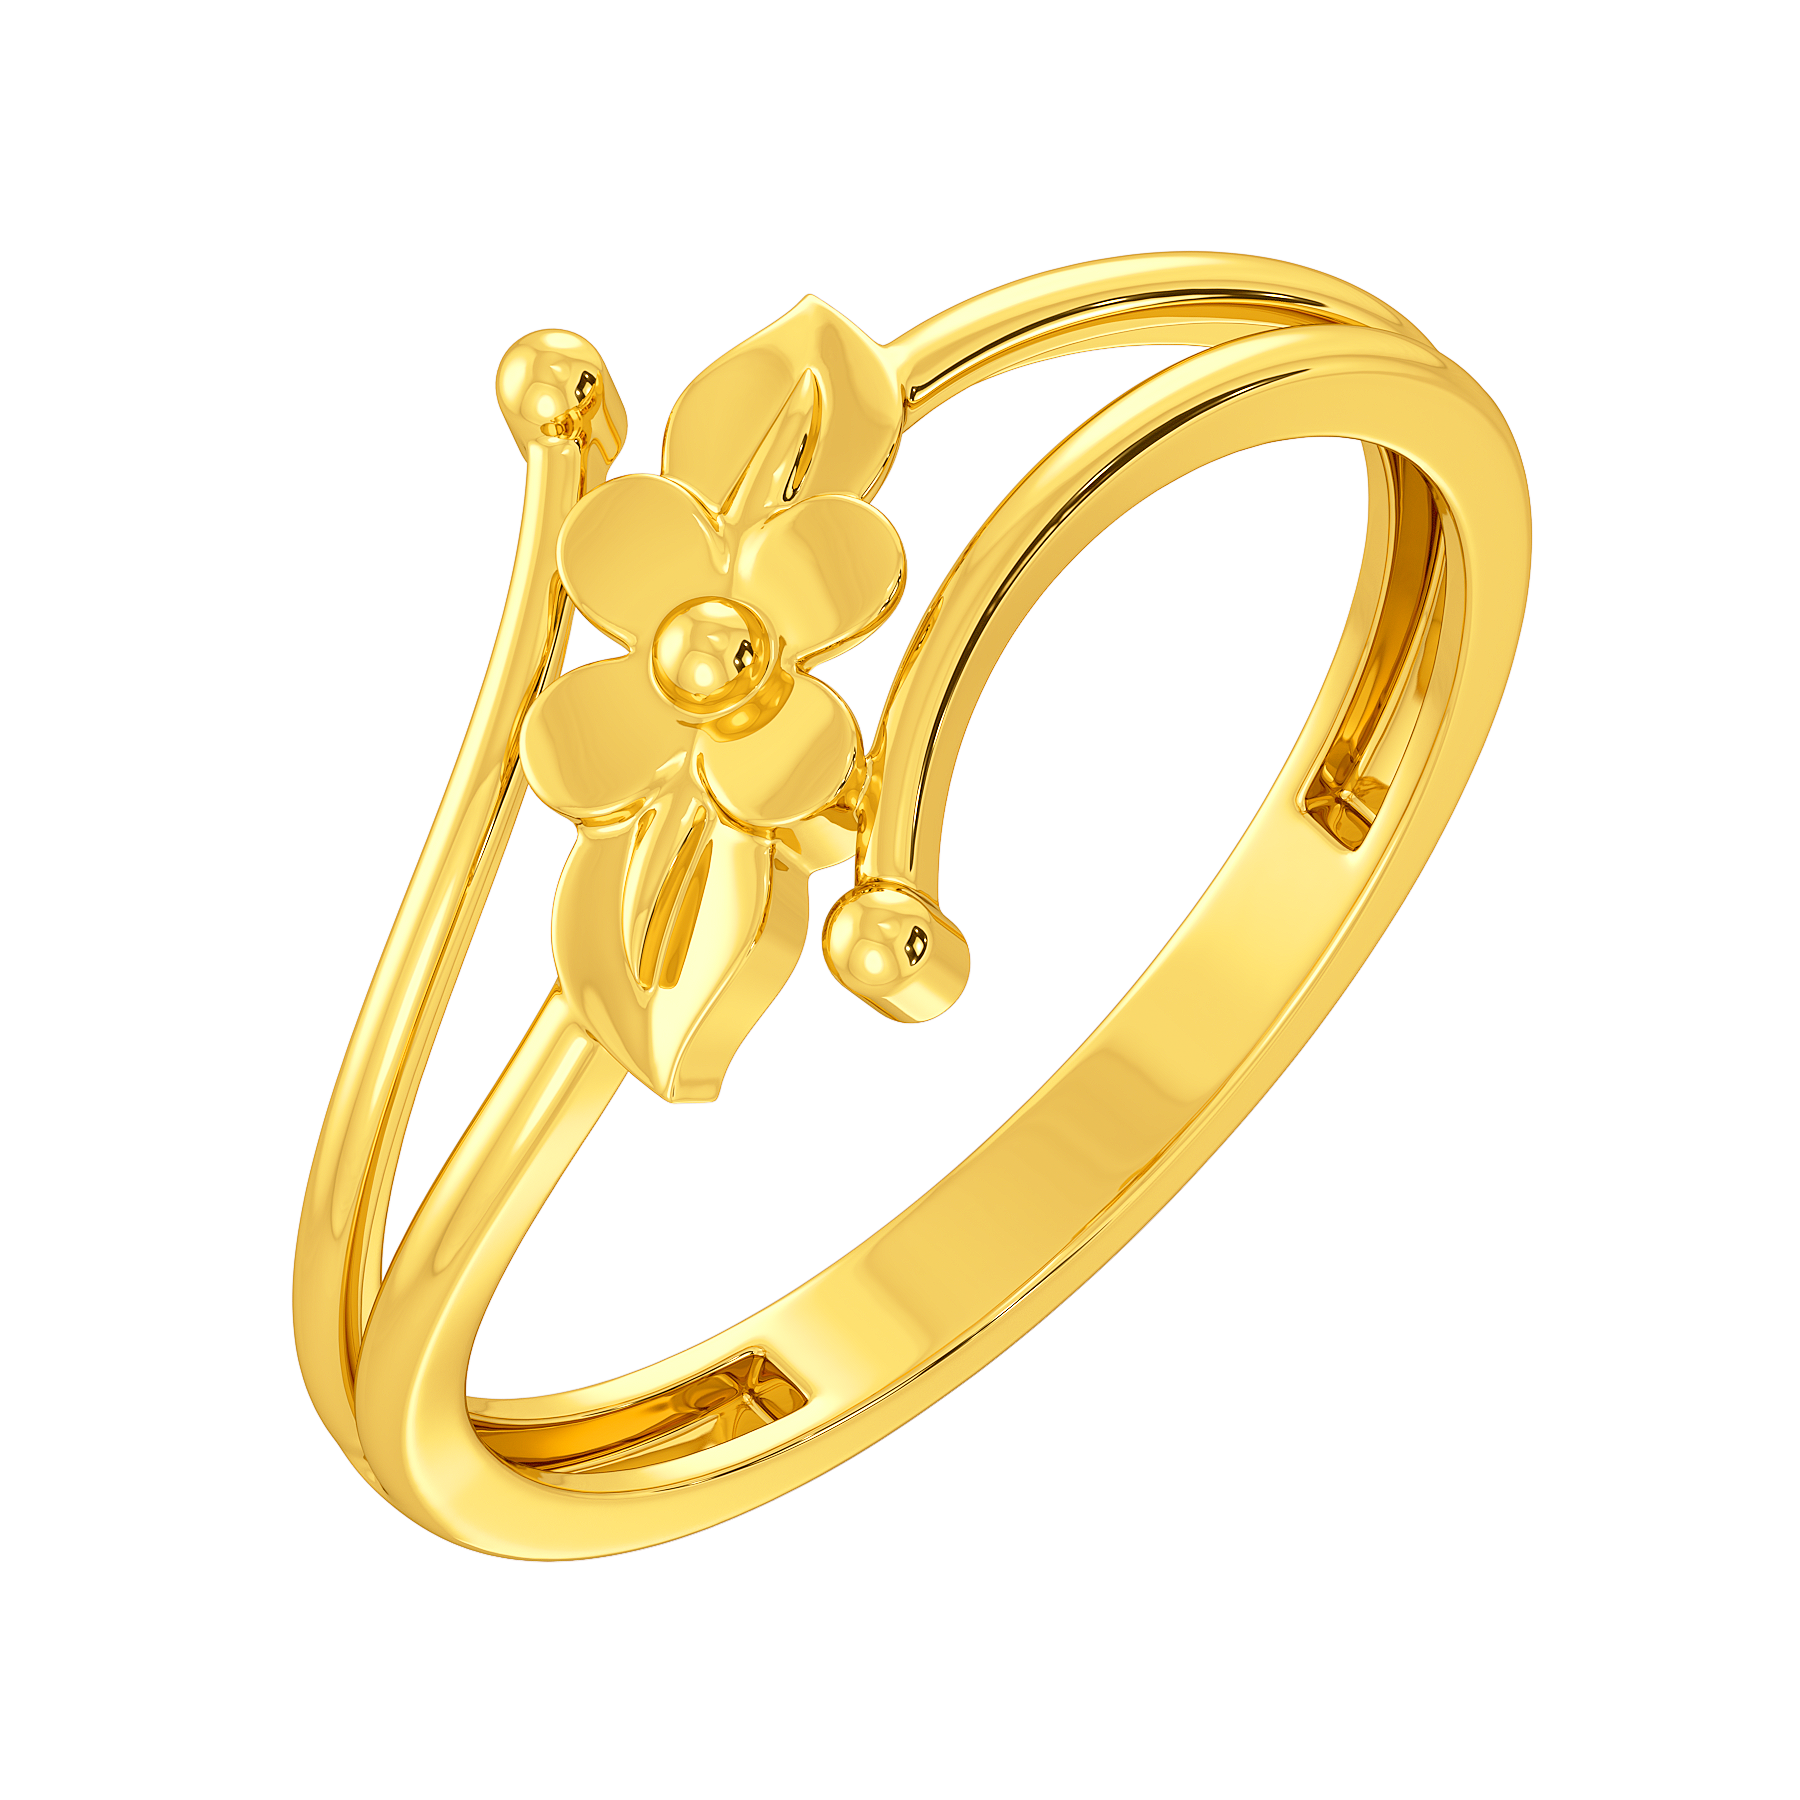 Buy quality 18K Gold Infinity shape Cz ladies ring in Ahmedabad